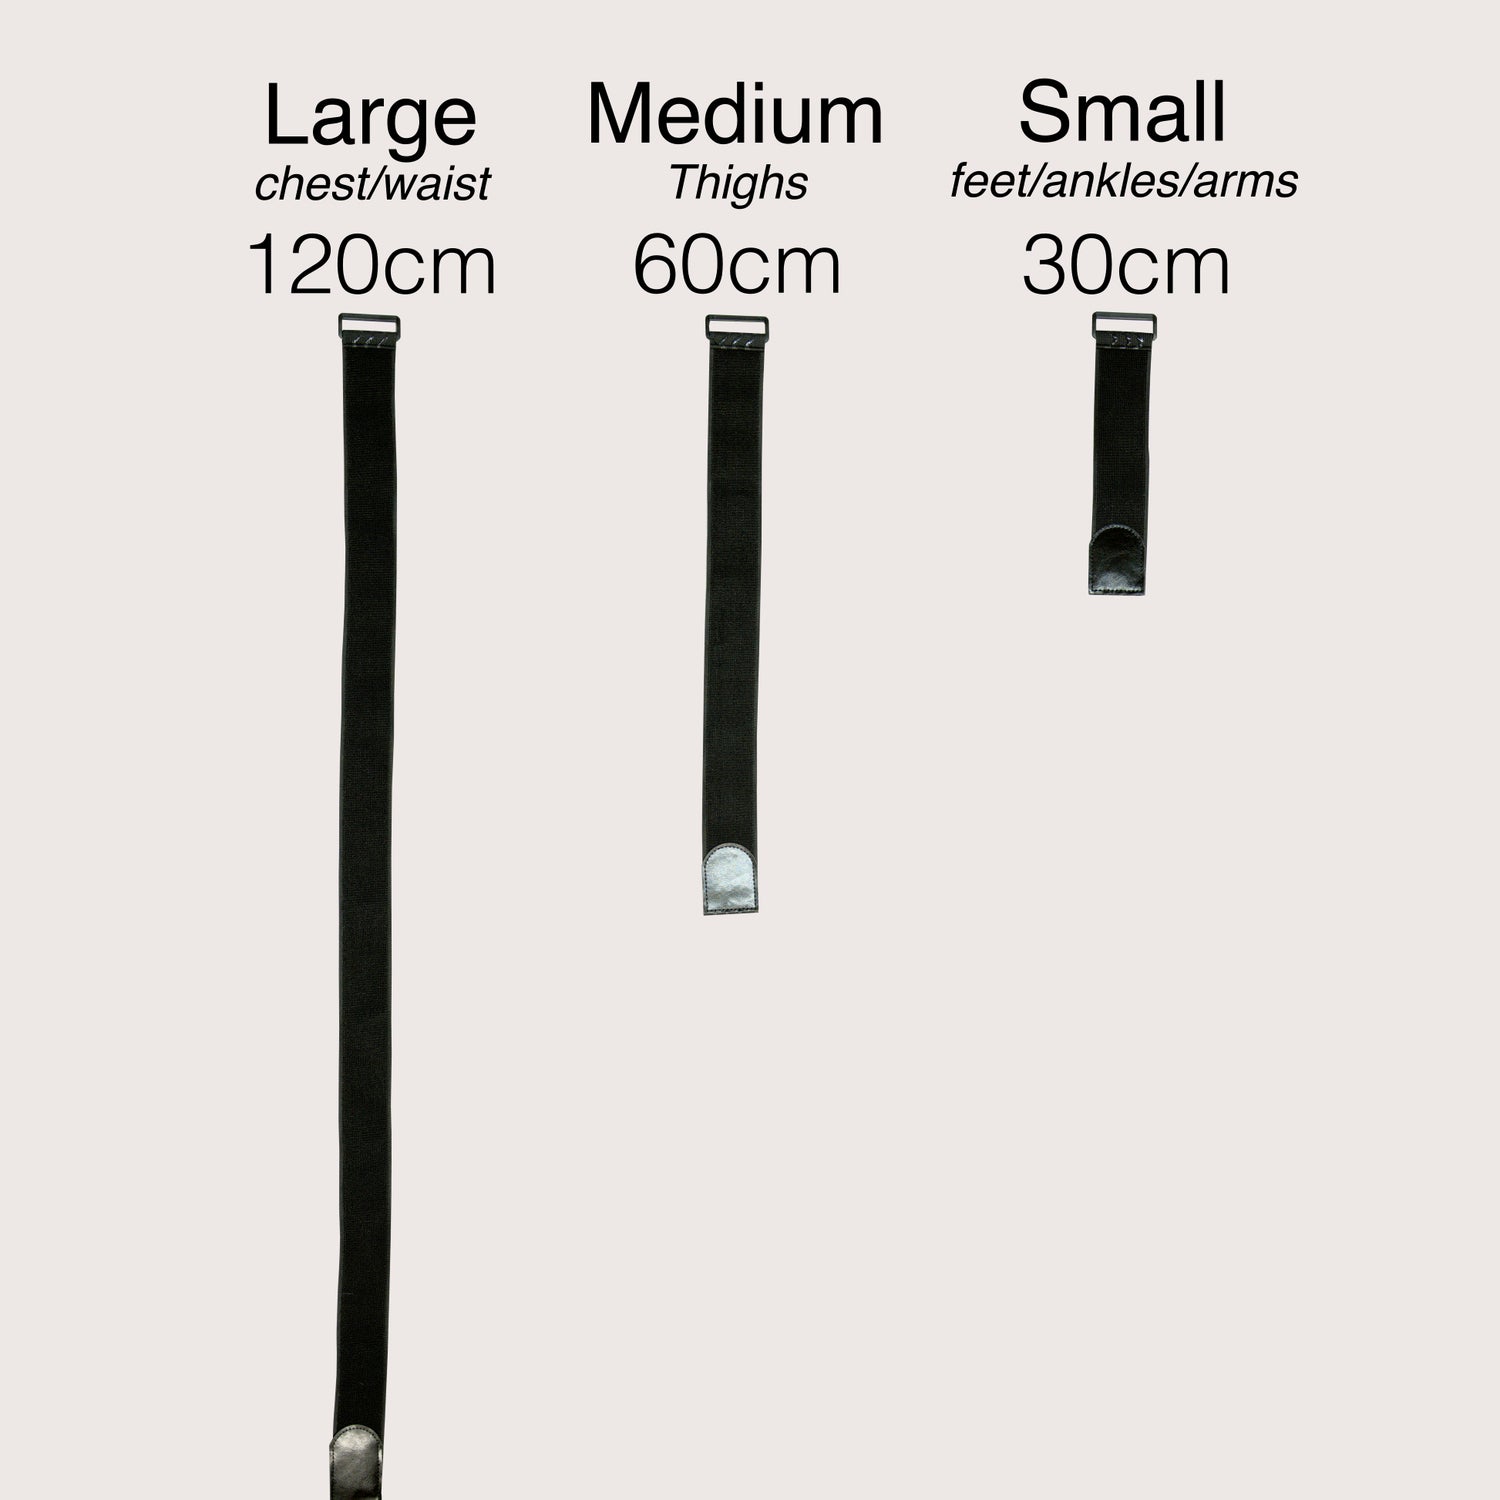 Varying sizes of elastic bands to secure EROS Trackers to your limbs. The Large strap intended for chest and waist trackers is 120cm. The Medium strap intended for thigh trackers is 60cm. The Small strap intended for feet, ankle, and arm tracking is 30cm. For motion tracking of your lower limbs, you will need 1 large, 2 medium, and 2 small straps. For true full-body tracking, you will need 2 large, 2 medium, and 6 small straps.